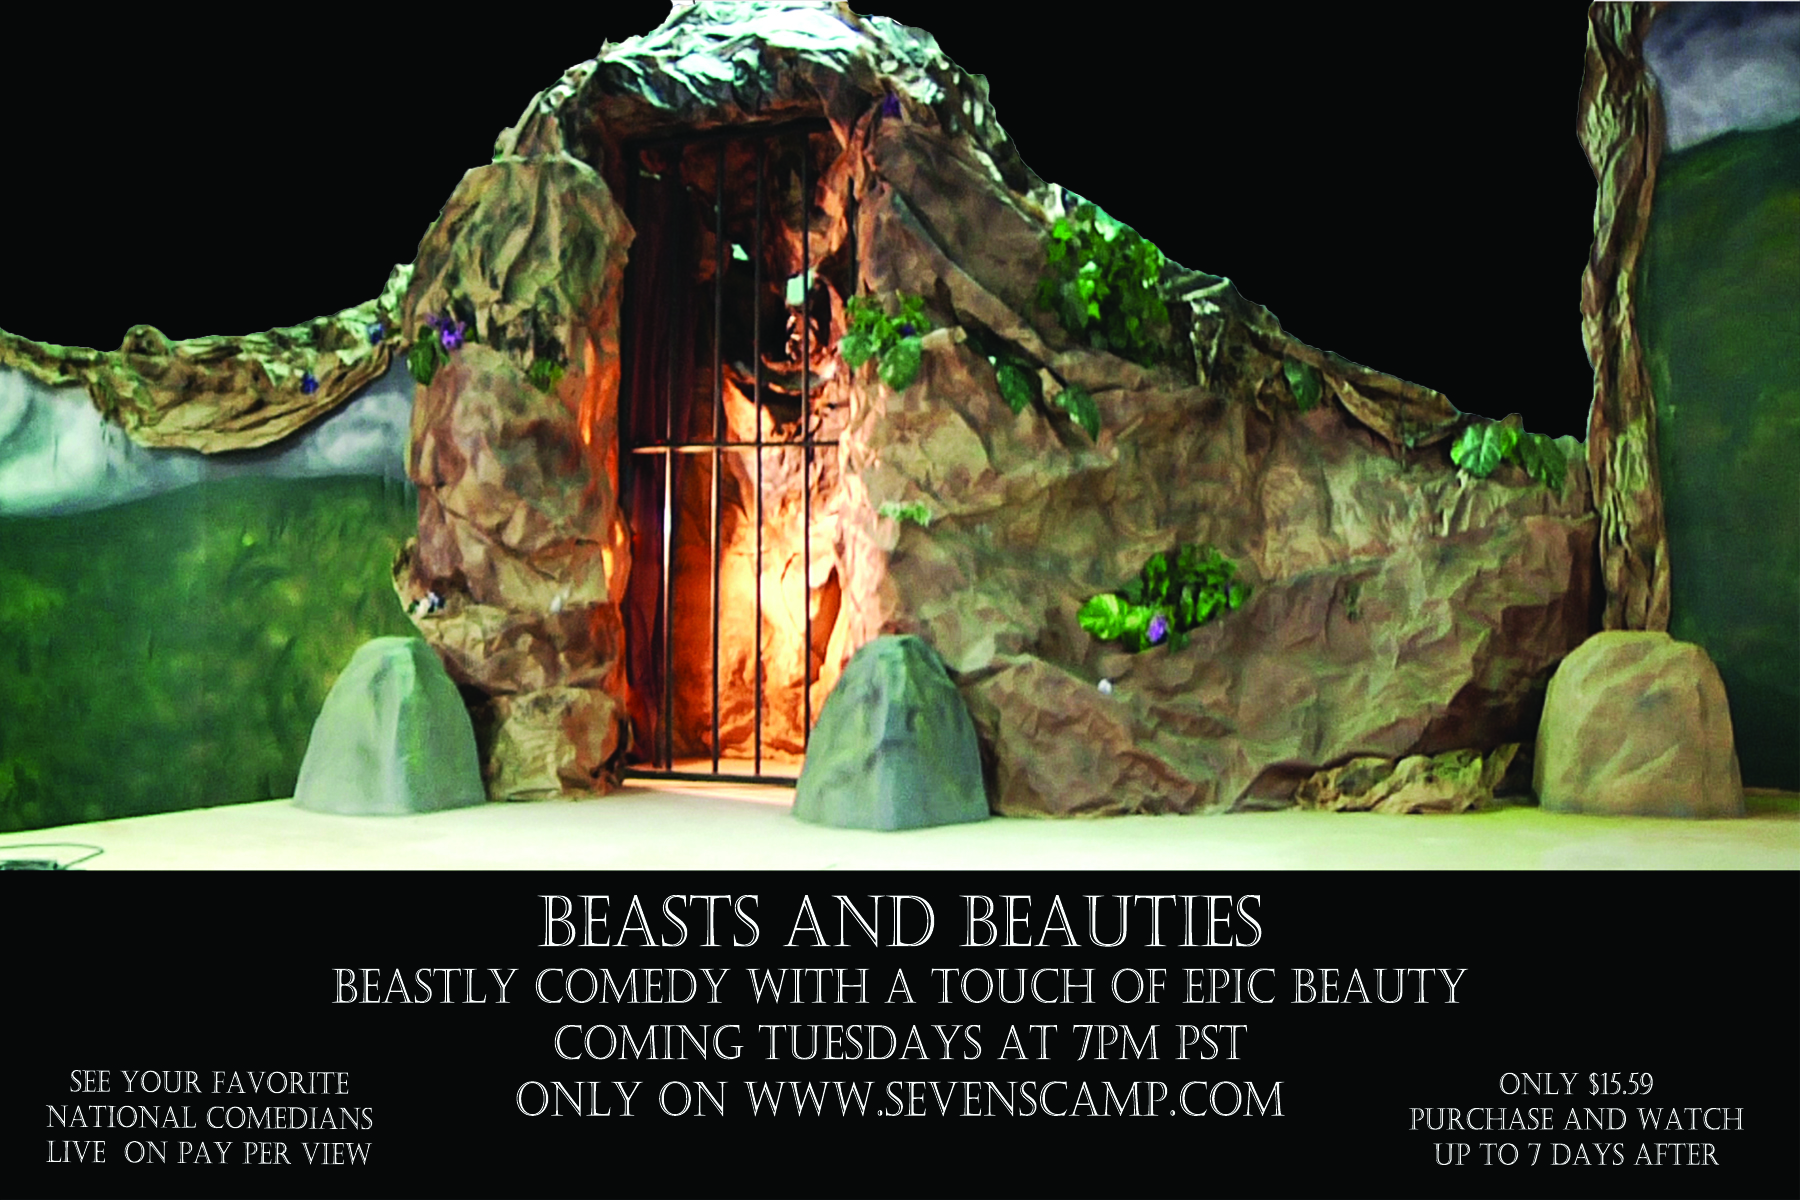 The Beast and Beauties Cave where only the beasts of comedy will pass through On the new pay per view comedy special Beasts and Beauties Only on the SEVENsCamp Webcasting Network Pay per view channel